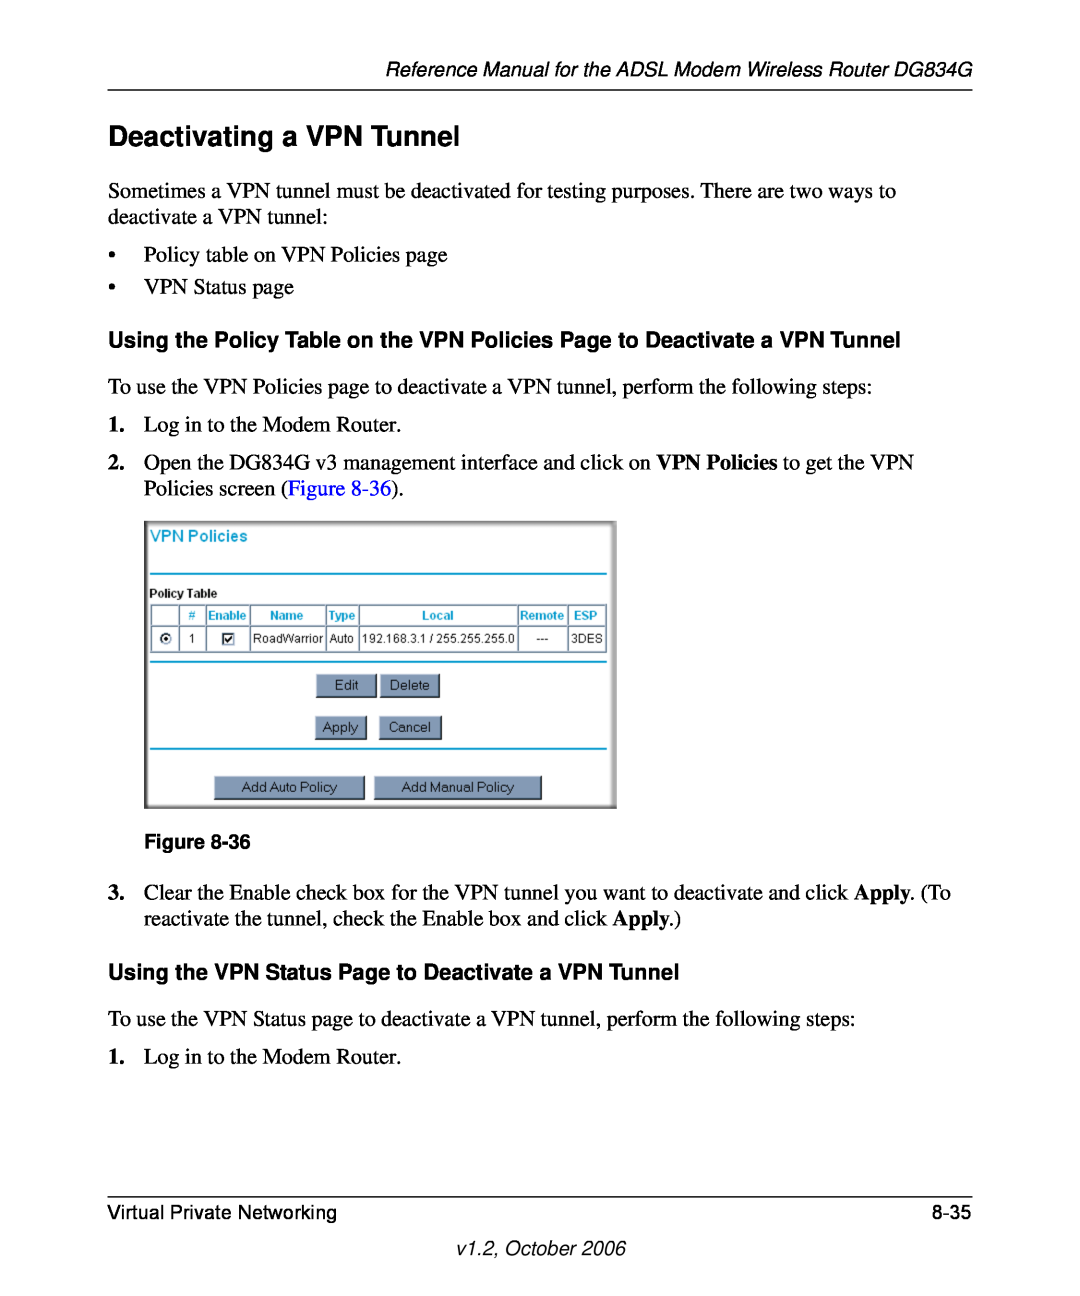 NETGEAR DG834G manual Deactivating a VPN Tunnel, Using the VPN Status Page to Deactivate a VPN Tunnel 